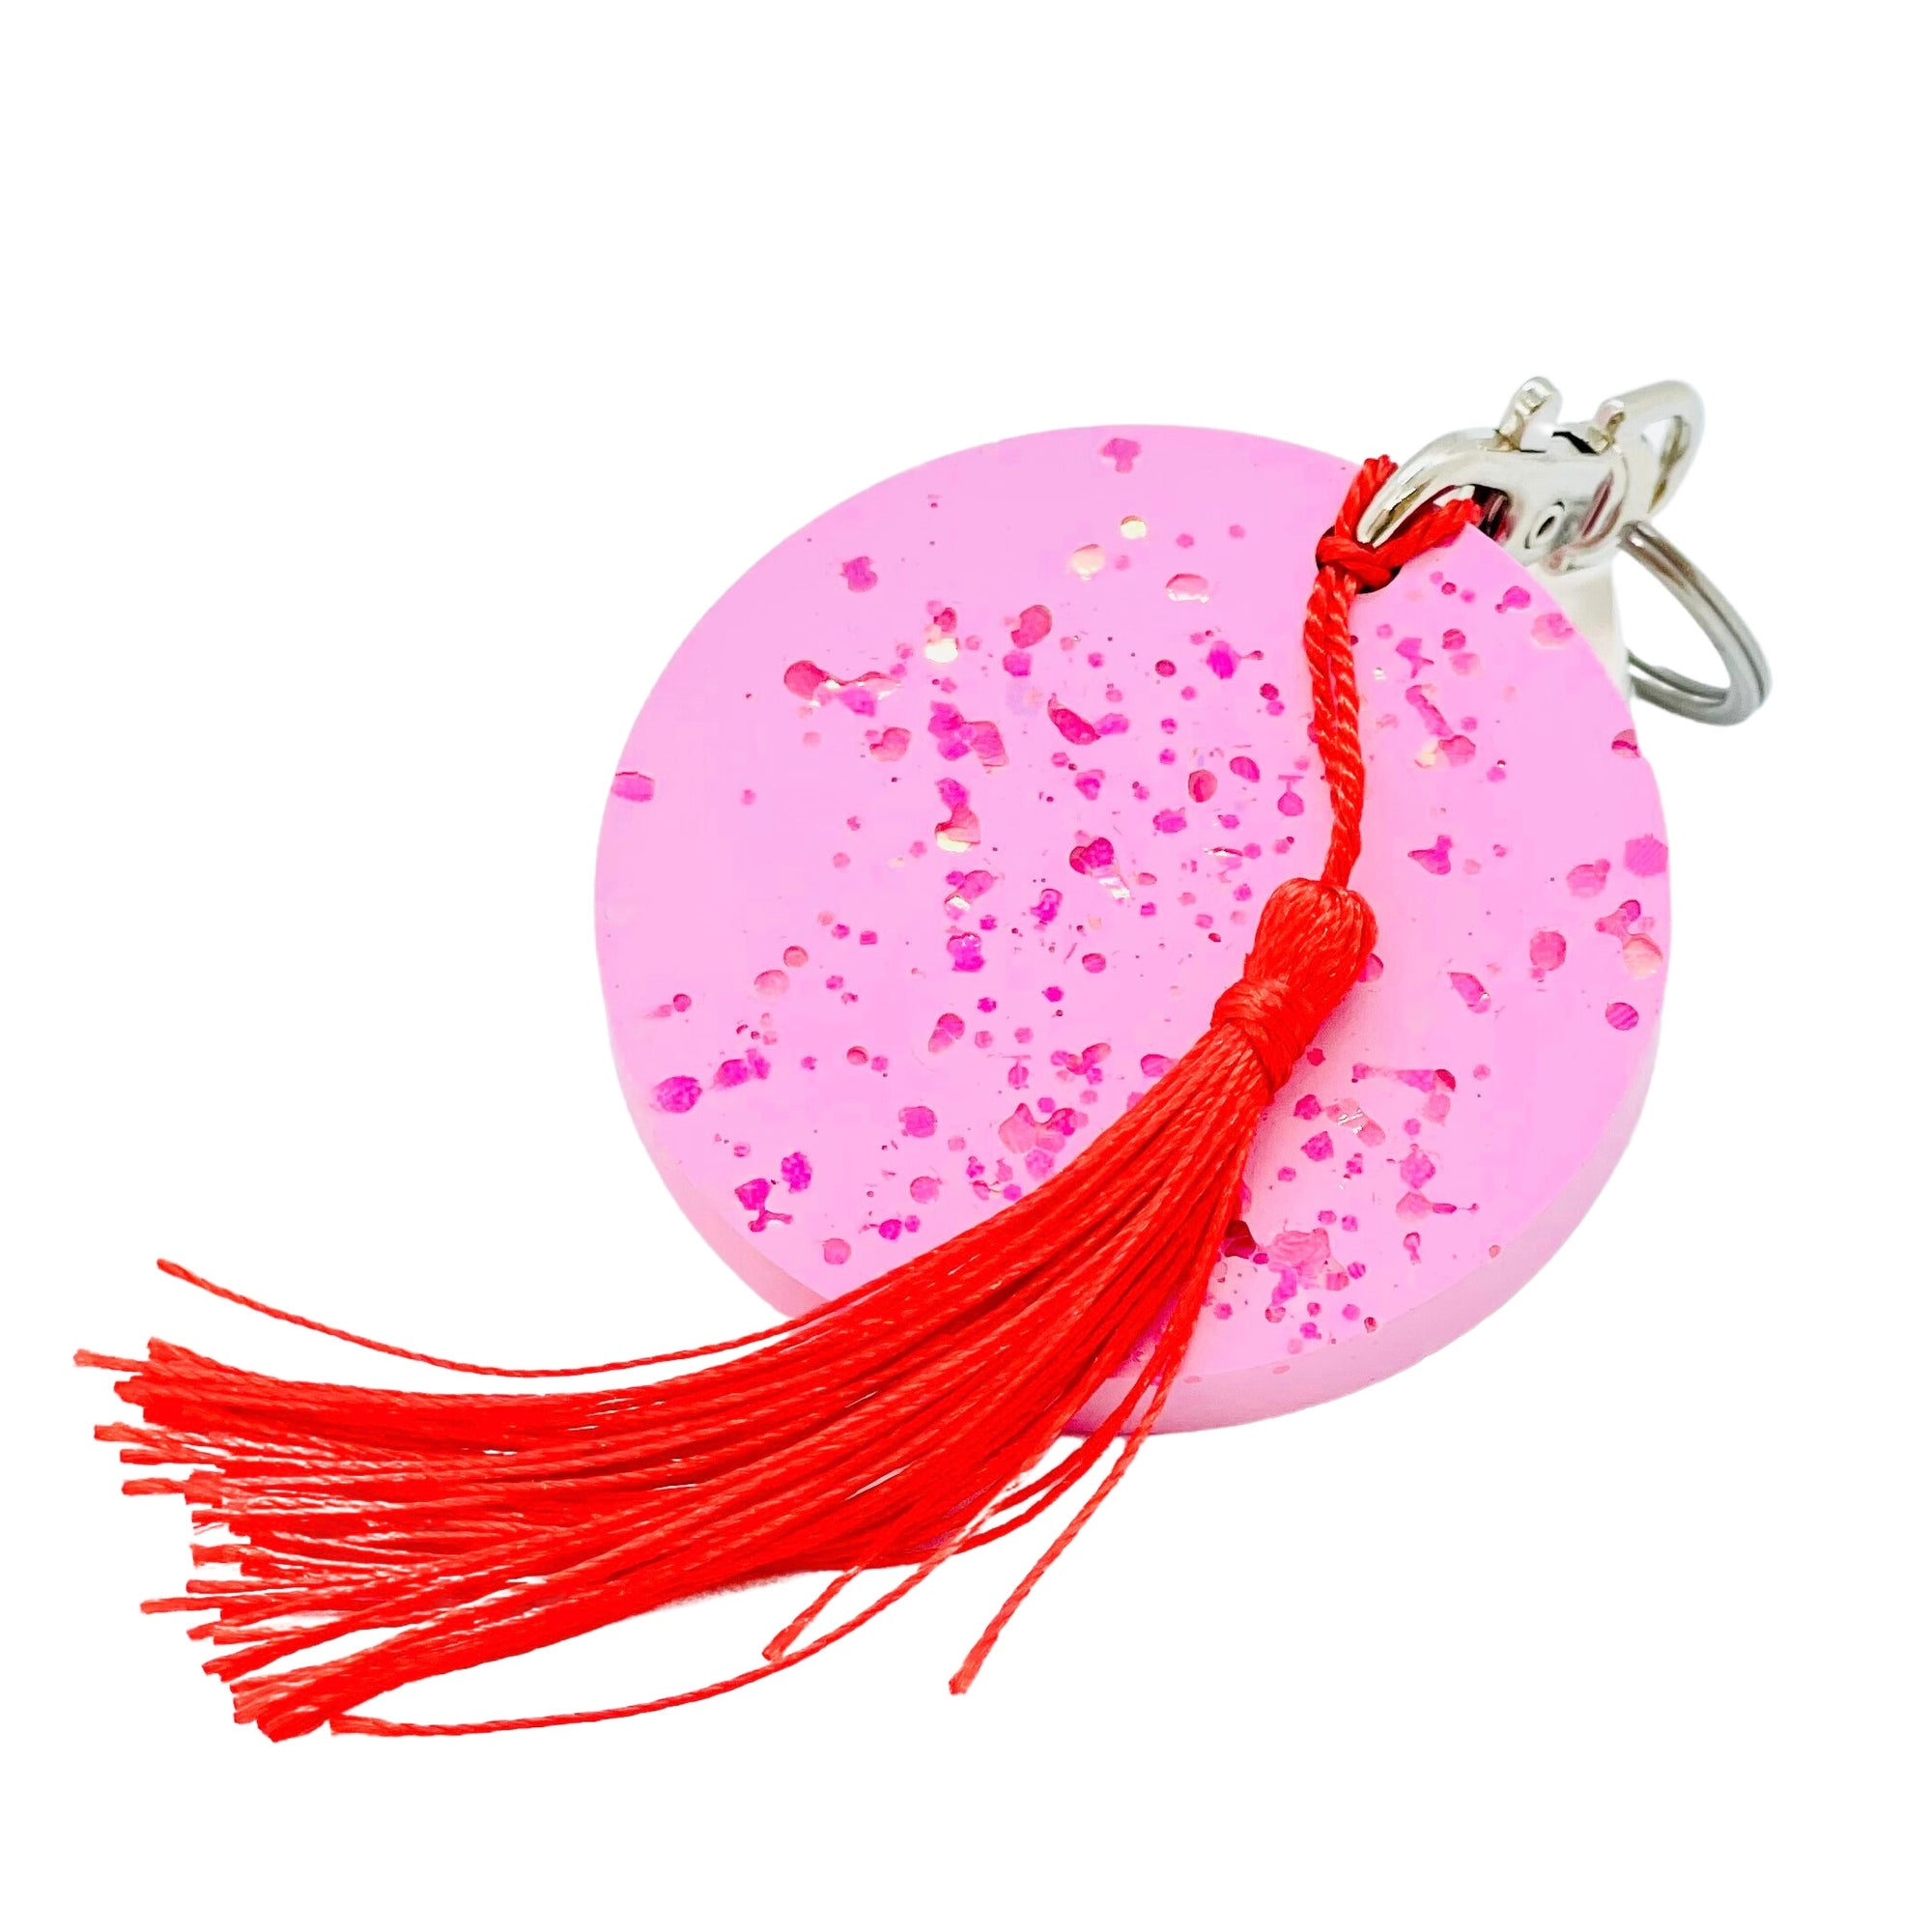 A round Jesmonite disc keyring measuring 6cm in diameter coloured with magenta pigment and sprinkled with pink glitter.